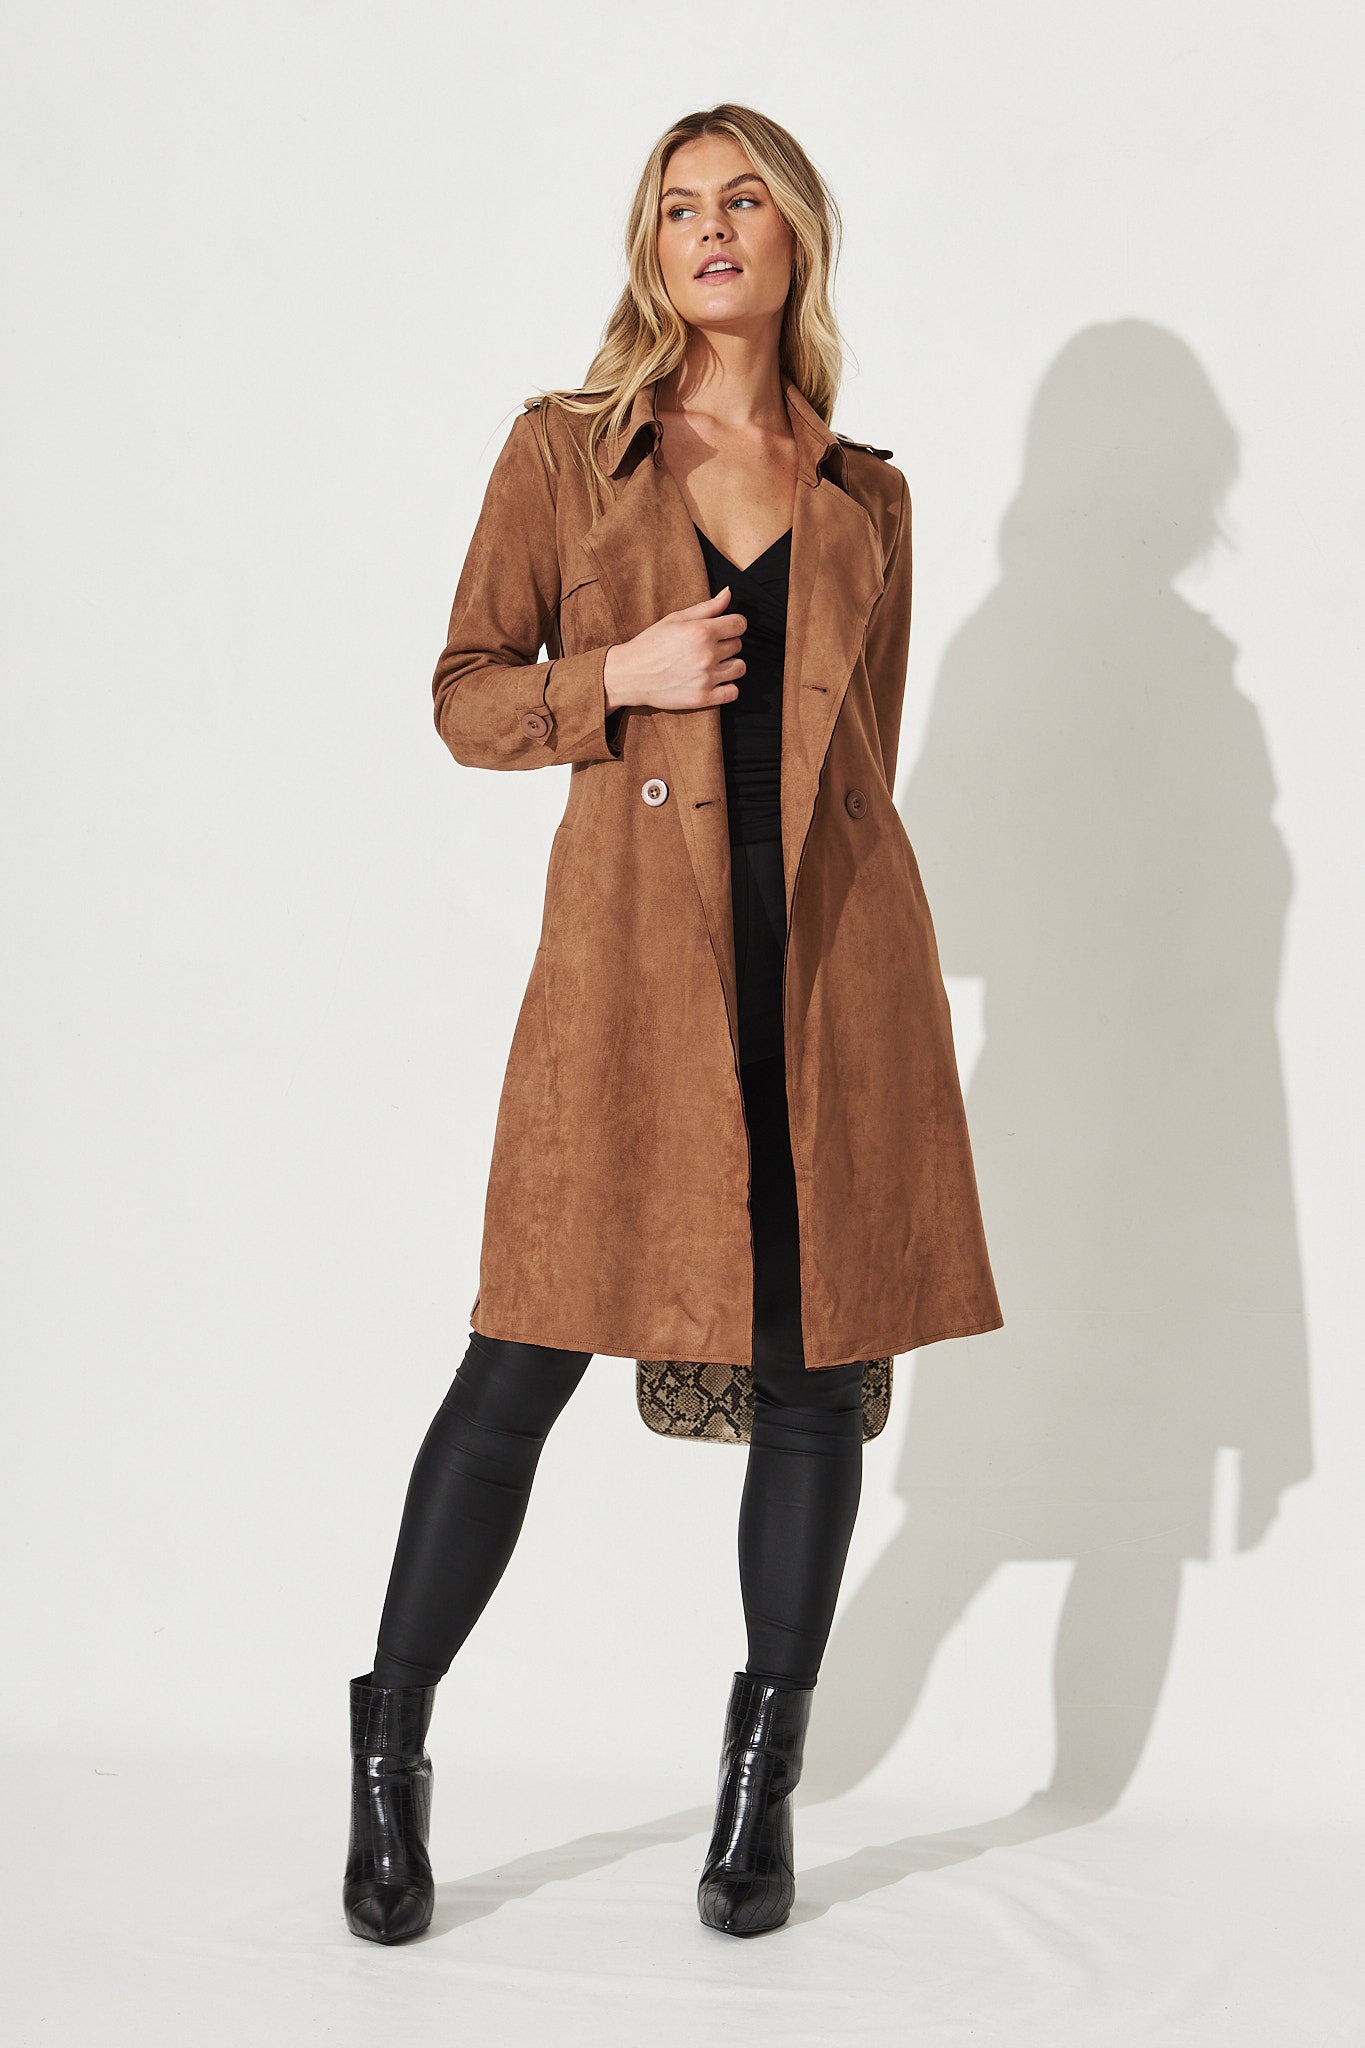 Mirage Trench Coat in Tan Suedette - Full Length